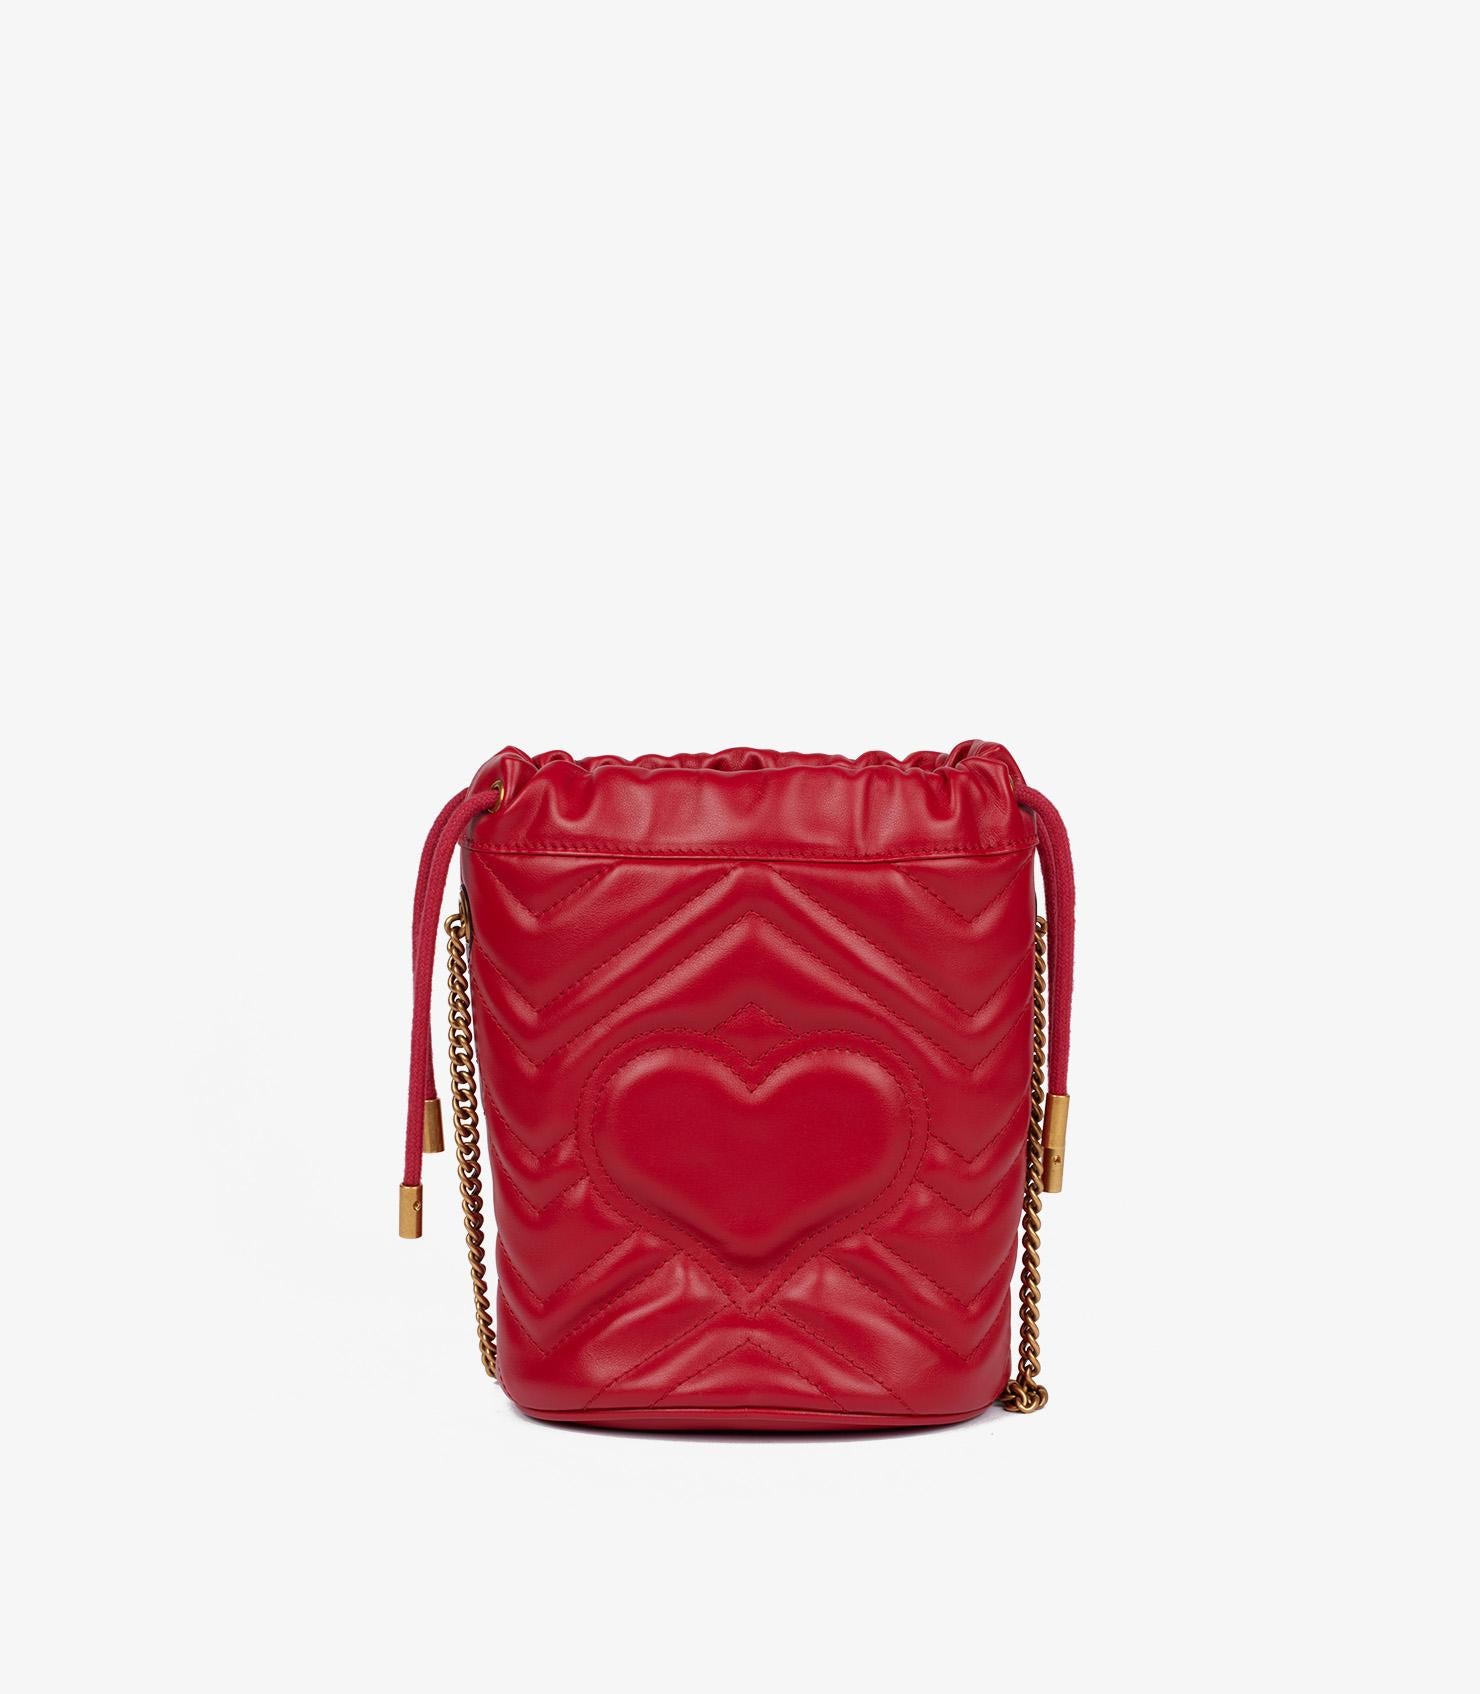 Gucci Red Chevron Quilted Calfskin Leather GG Marmont Mini Bucket Bag For Sale 2